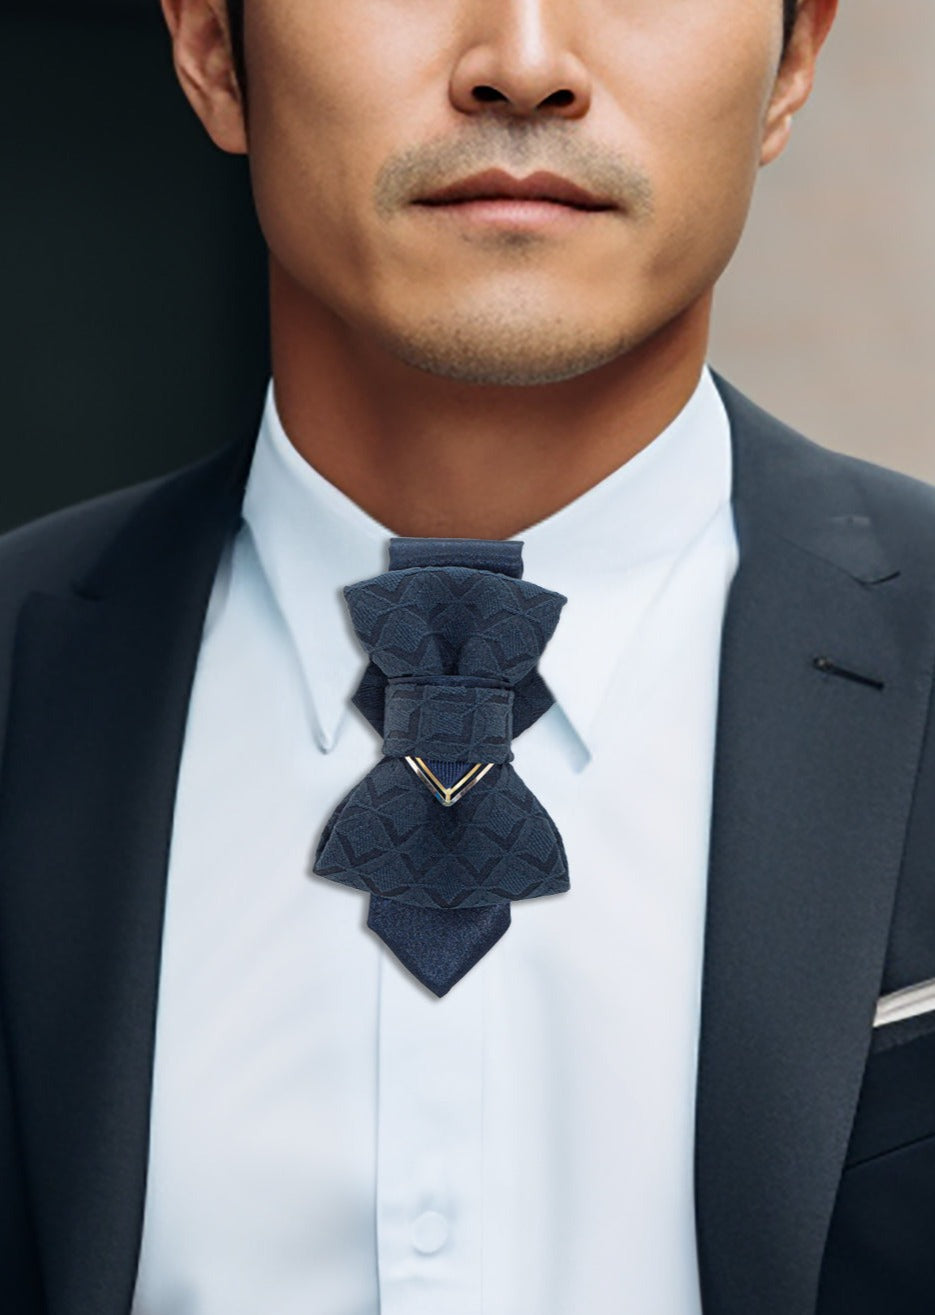 BOW TIE "ACCENT"